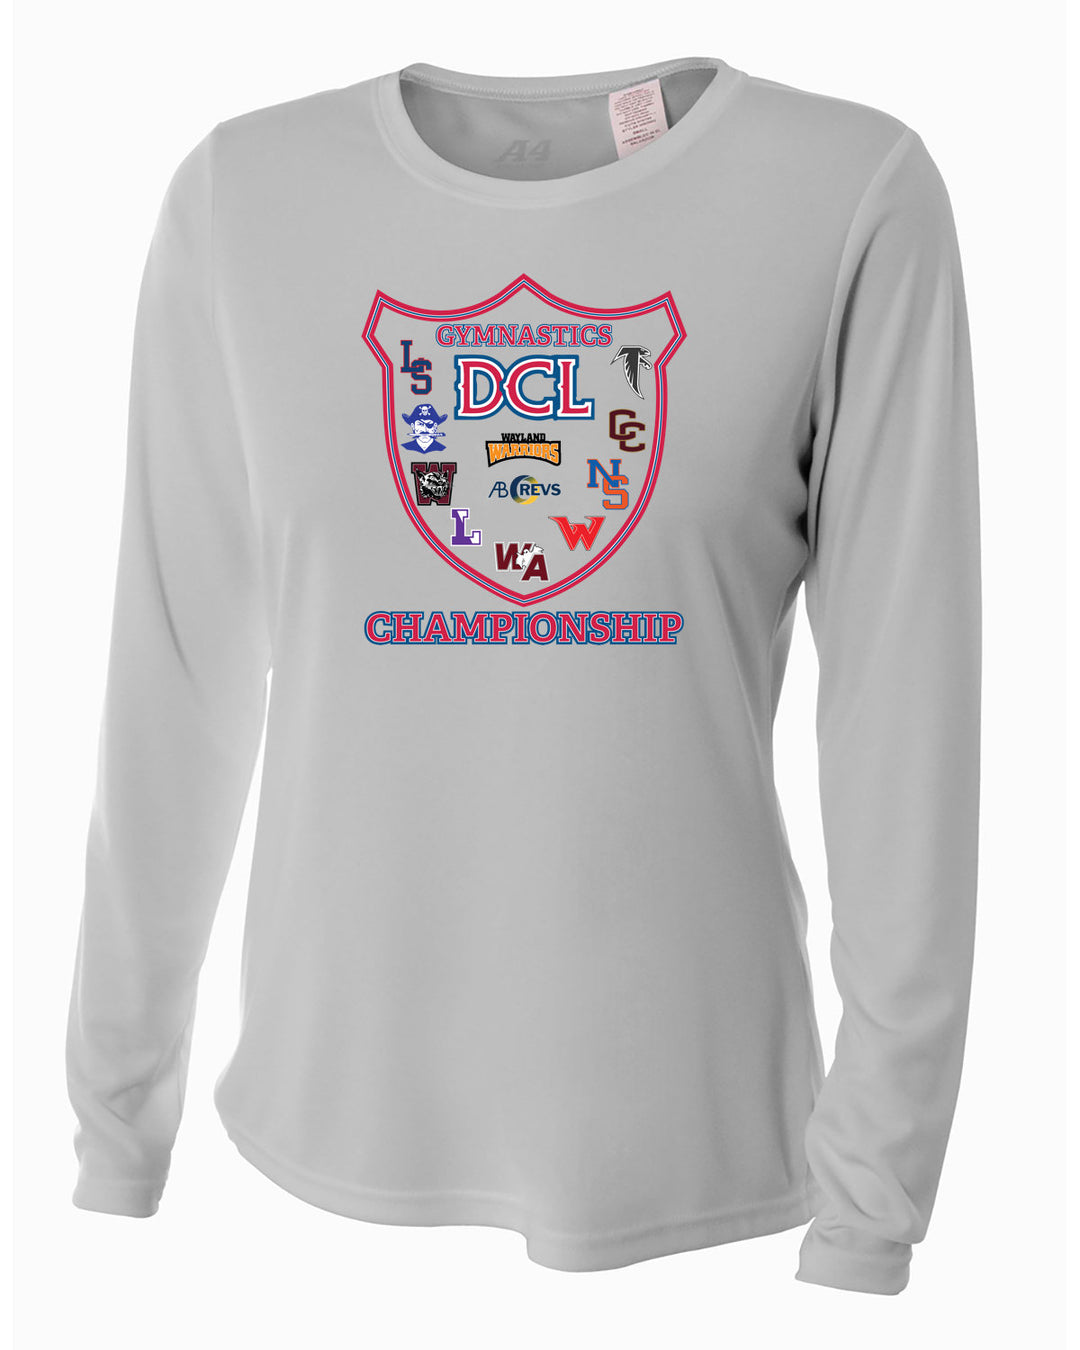 DCL Gymnastics Championship - Women's Long Sleeve Cooling Performance Crew Shirt (NW3002)